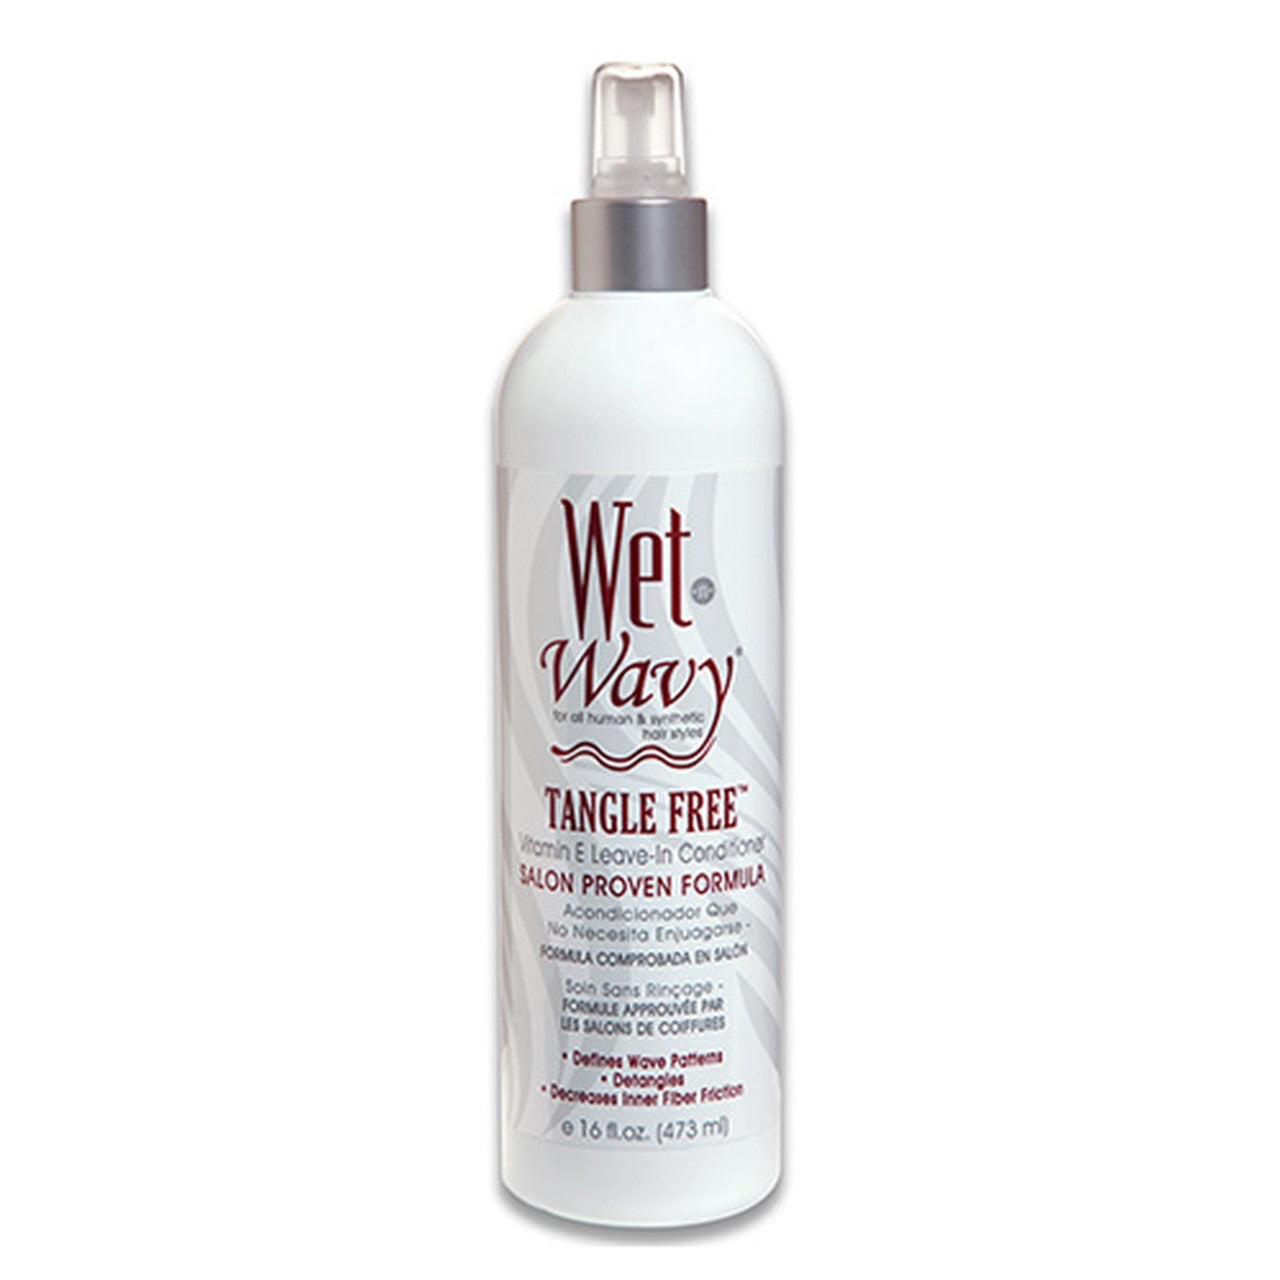 Wet n wavy tangle free leave in conditioner 16oz